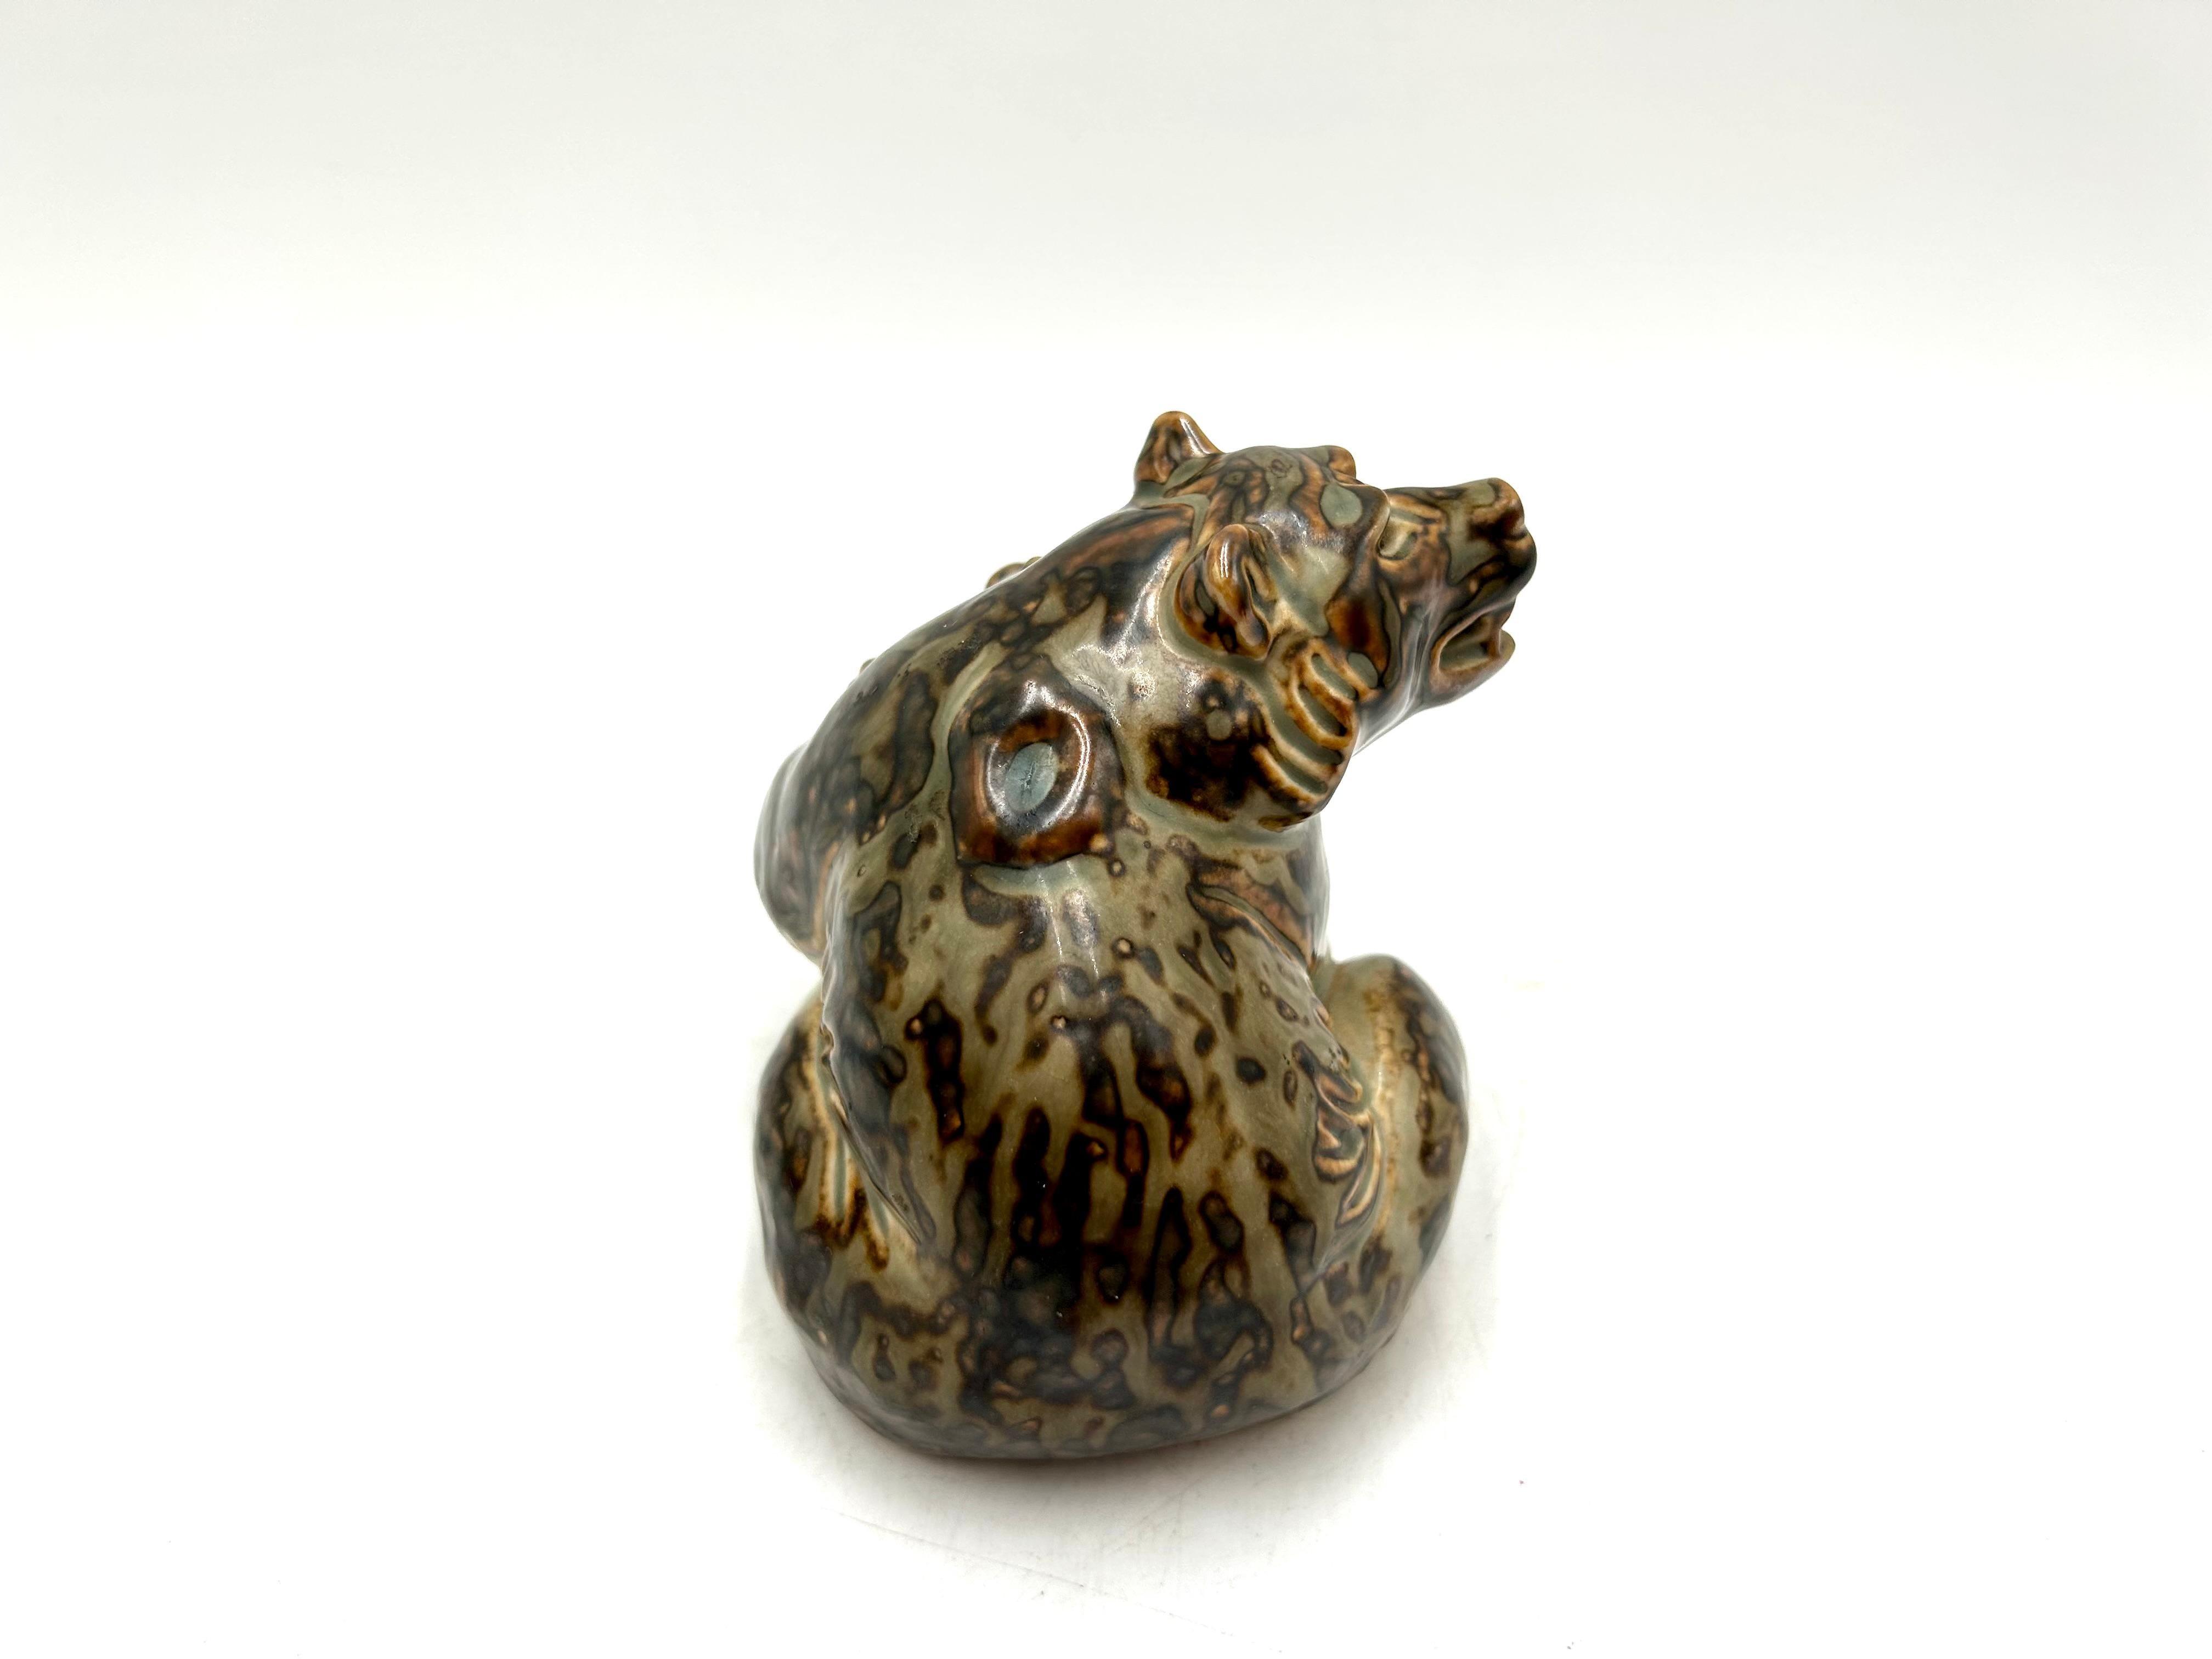 Porcelain Figurine of a Bear with Cub, Designed by Knud Kyhn, Royal Copenhagen In Good Condition For Sale In Chorzów, PL